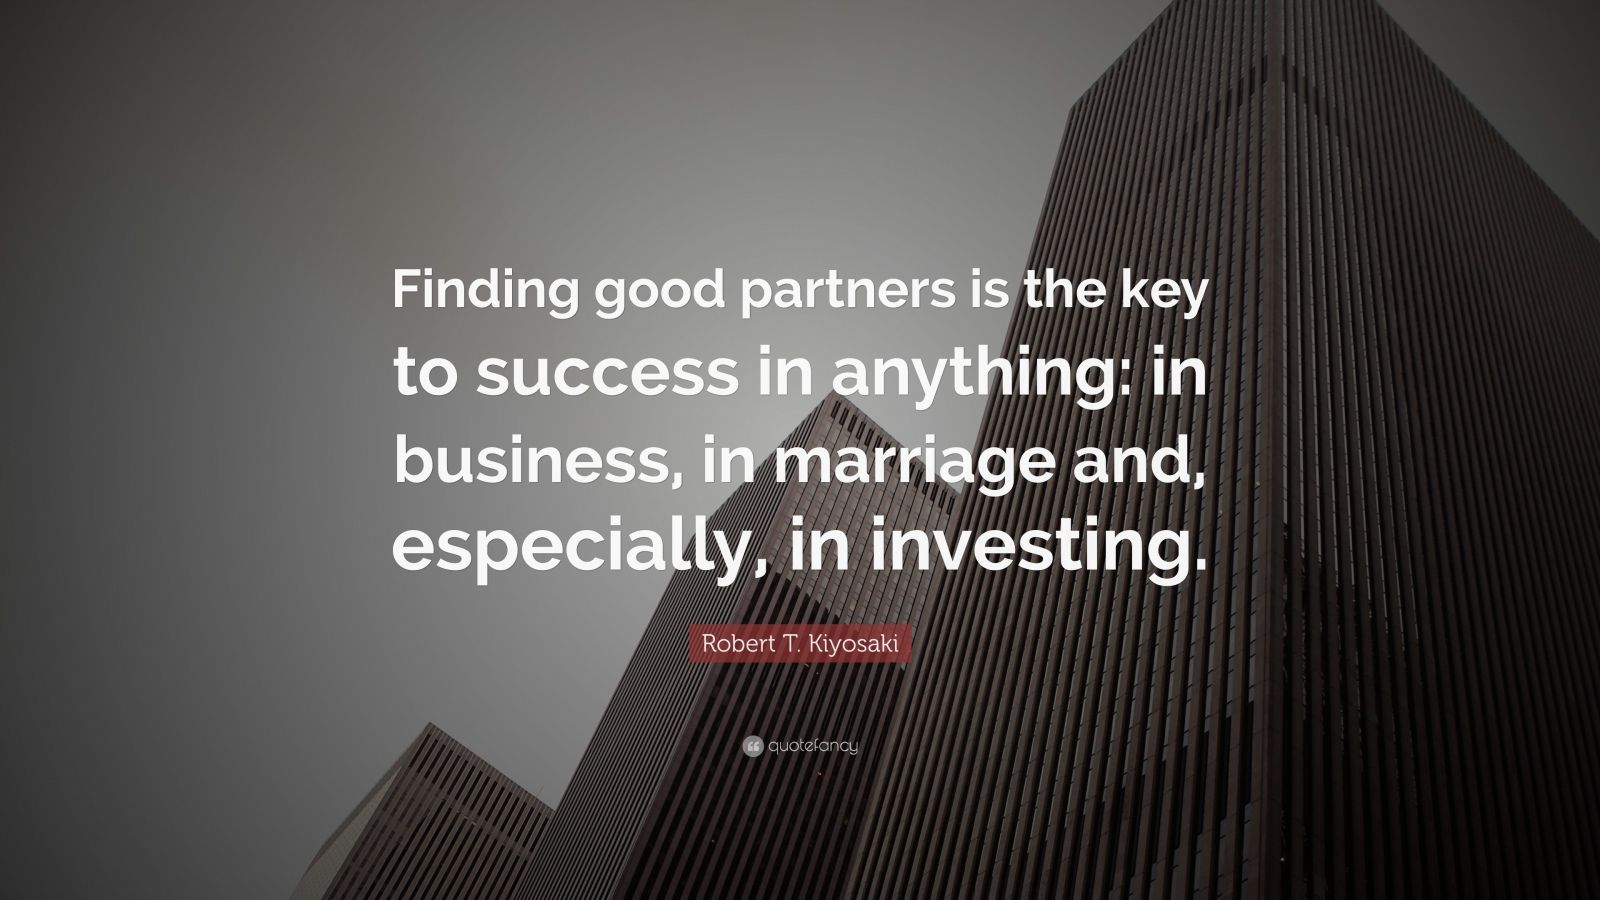 Business relationships human life quotes connection quote robin sharma success inspirational motivational